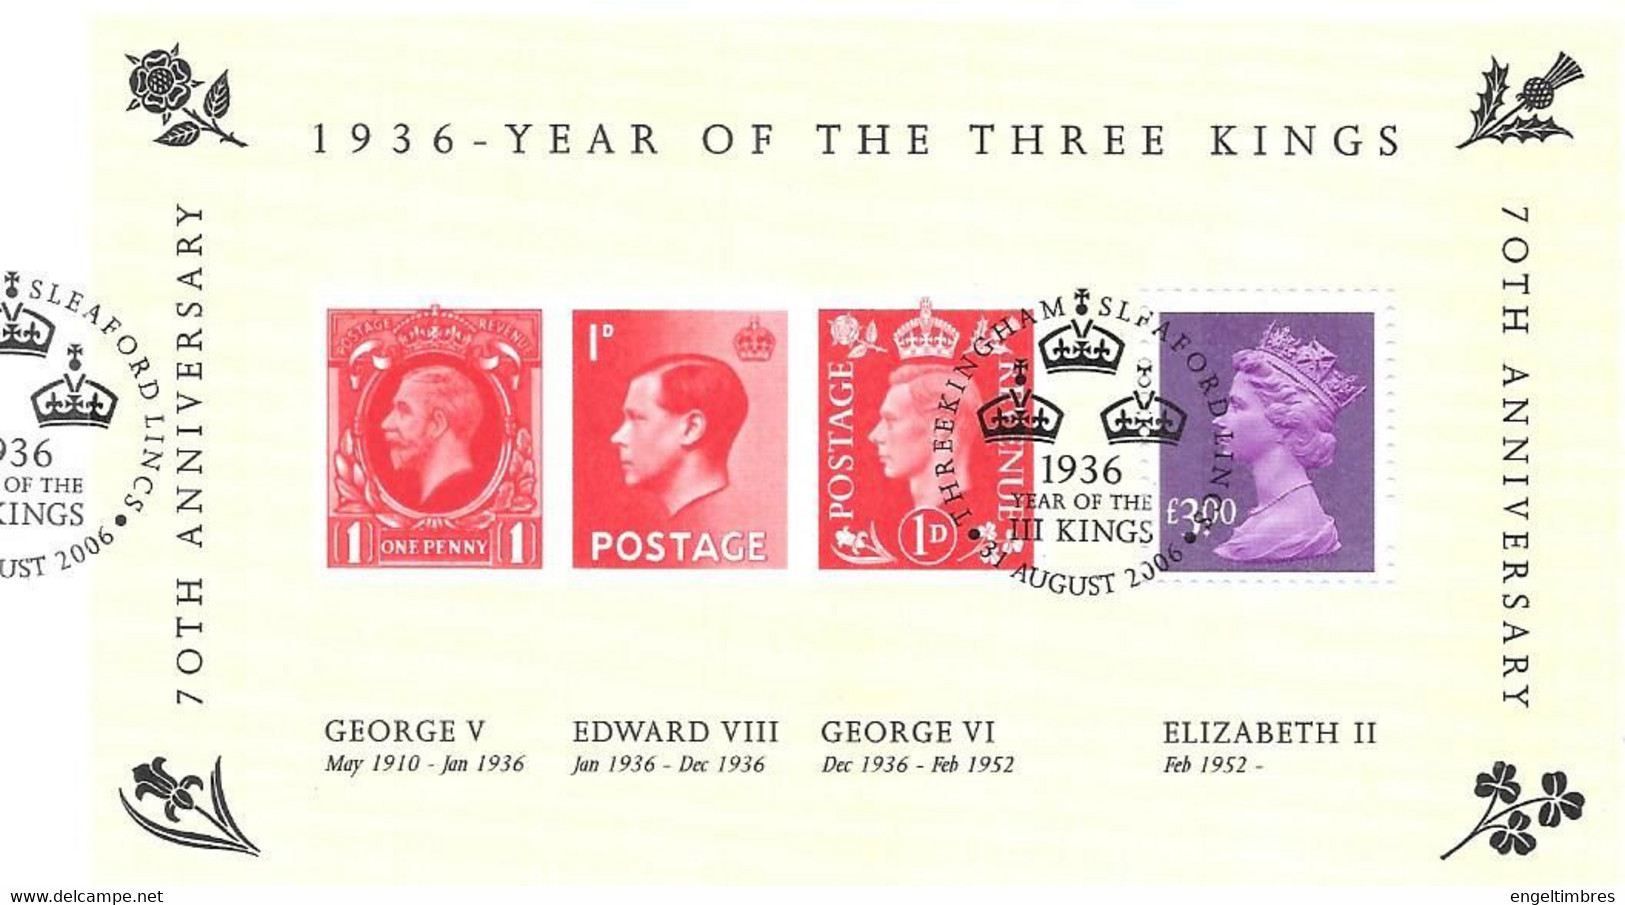 GB - 2006  Year Of THRERE KINGS  MINISHEET    FDC Or  USED  "ON PIECE" - SEE NOTES  And Scans - 2001-2010 Decimal Issues